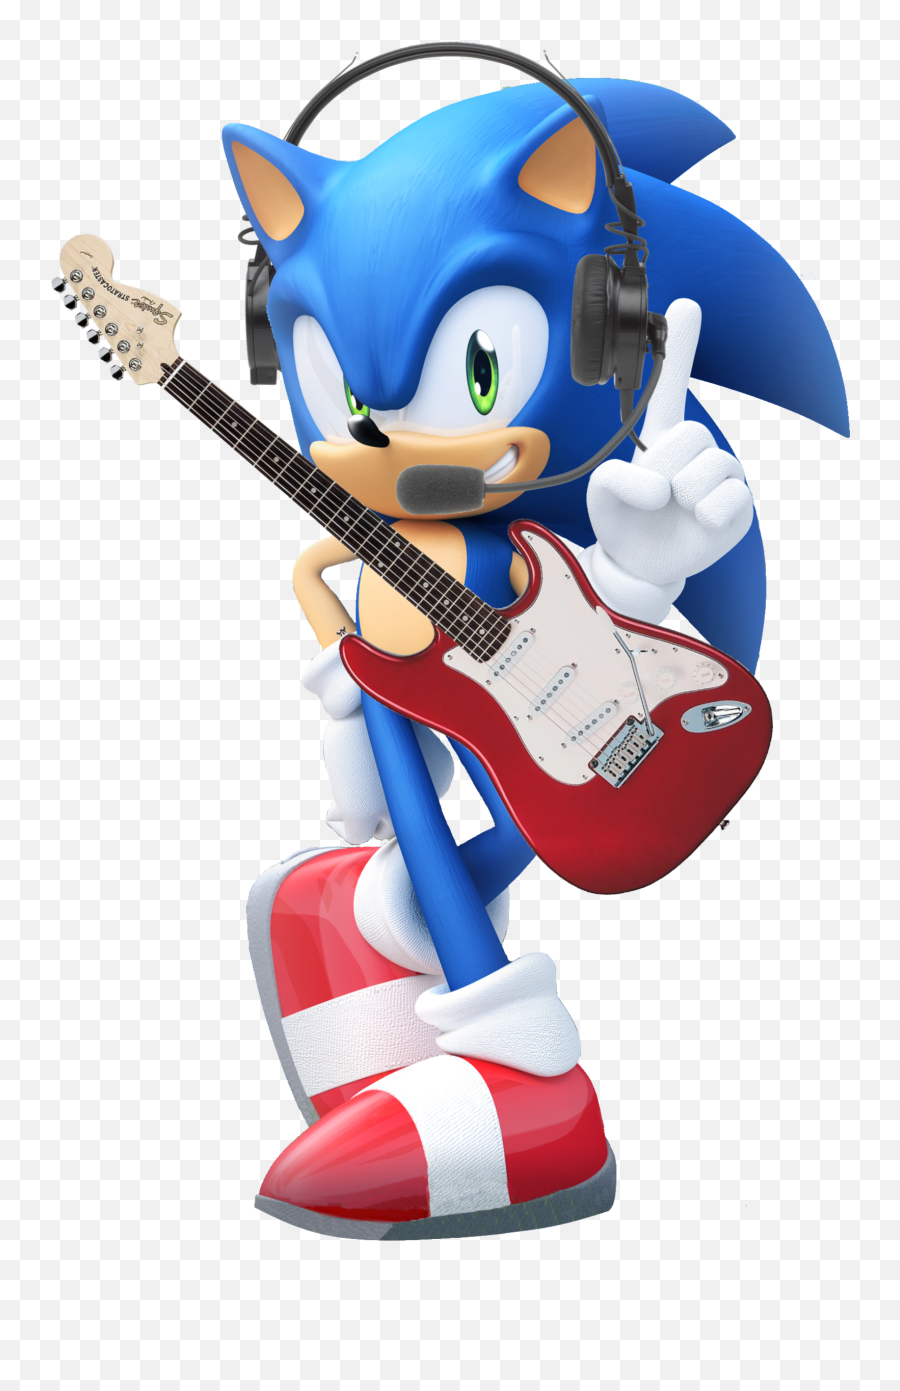 Sonic The Hedgehog Electric Guitar - Sonic The Hedgehog Png Emoji,Sonic The Hedgehog Emoji